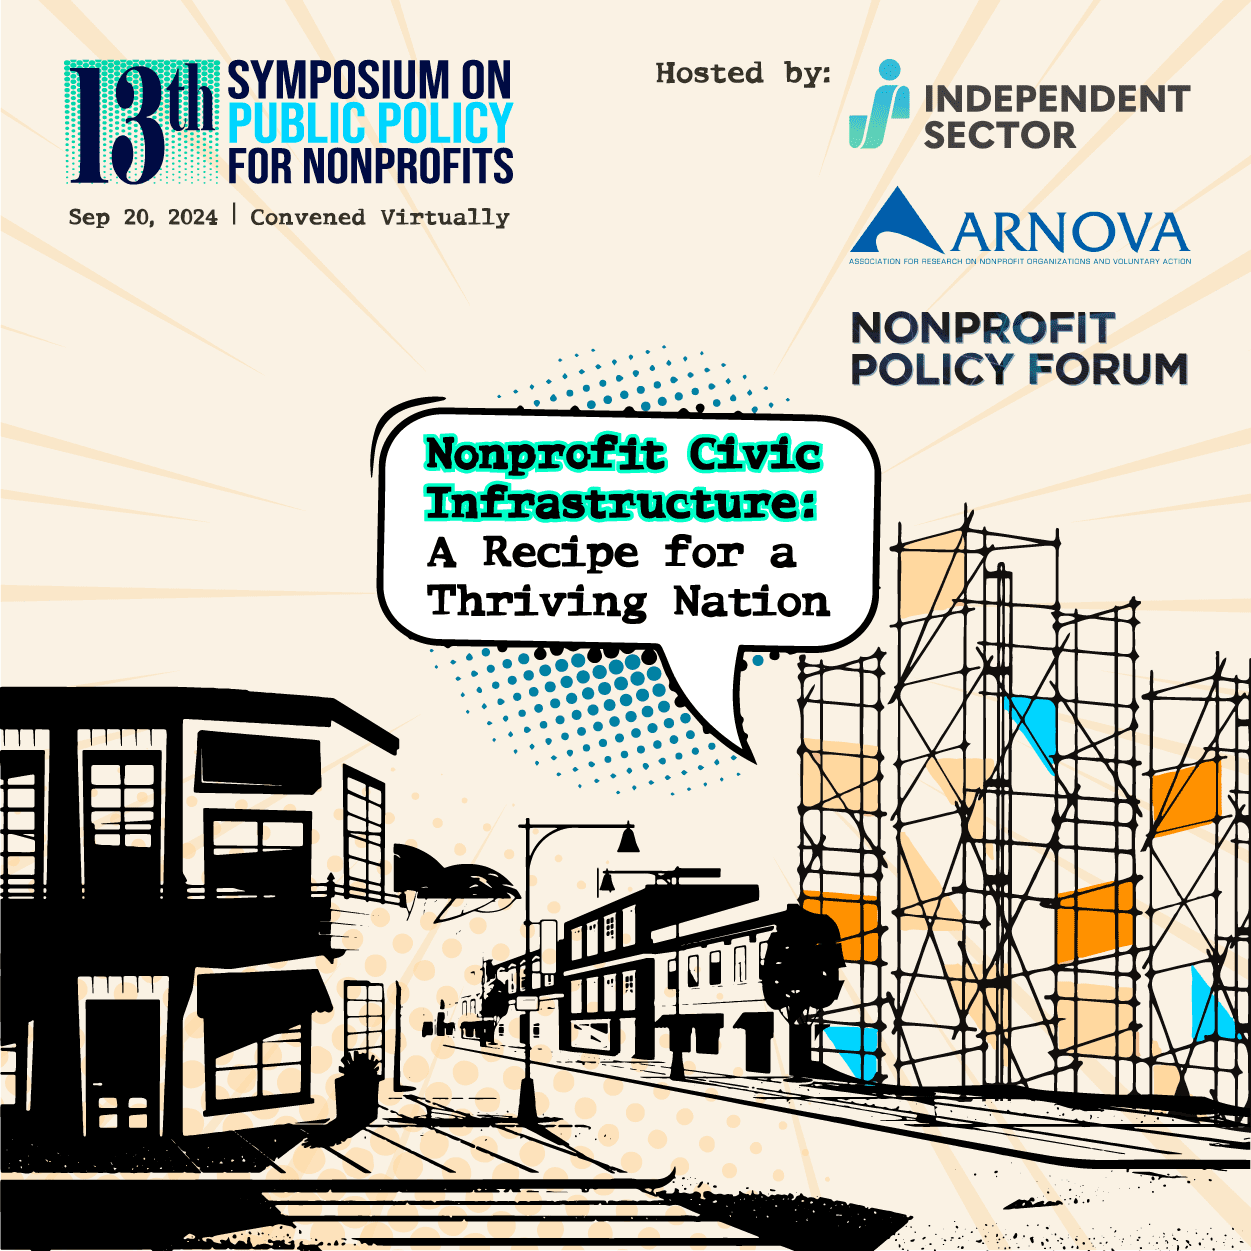 13th Symposium on Public Policy for Nonprofits: "Nonprofit Civic Infrastructure: A Recipe for a Thriving Nation." Sep 20, 2024. Convened Virtually. Hosted by Independent Sector, ARNOVA, and Nonprofit Policy Forum.